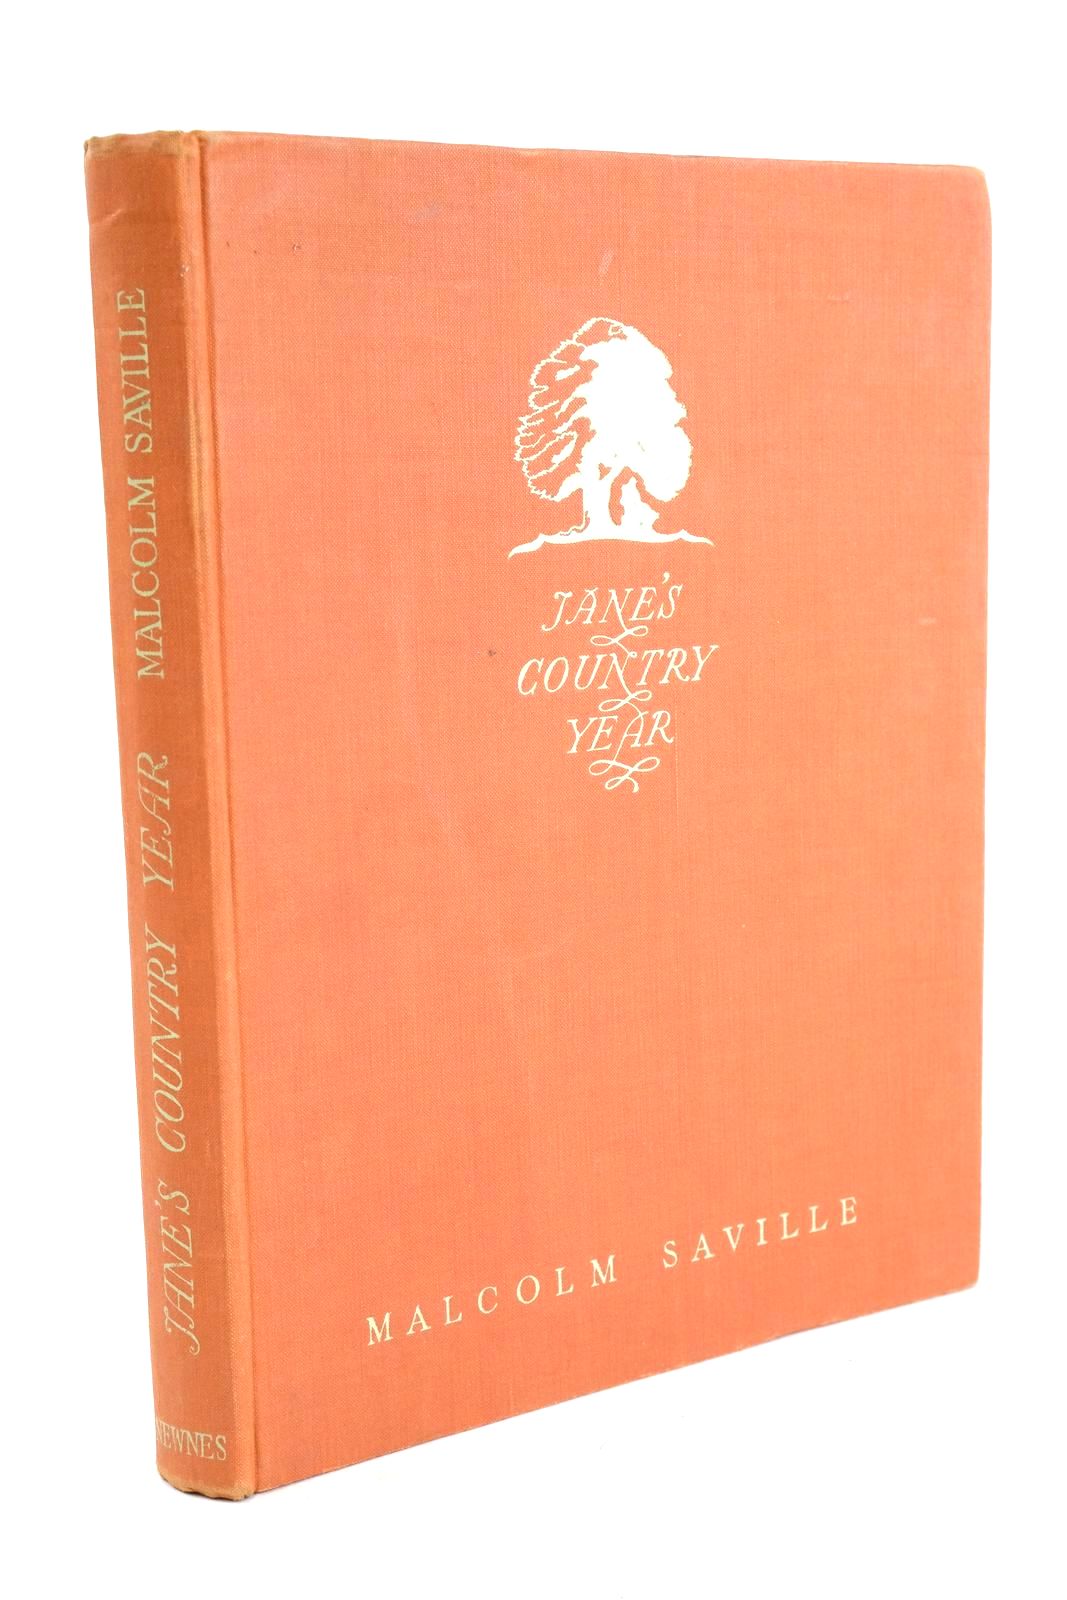 Photo of JANE'S COUNTRY YEAR written by Saville, Malcolm illustrated by Bowerman, Bernard published by George Newnes (STOCK CODE: 1324610)  for sale by Stella & Rose's Books